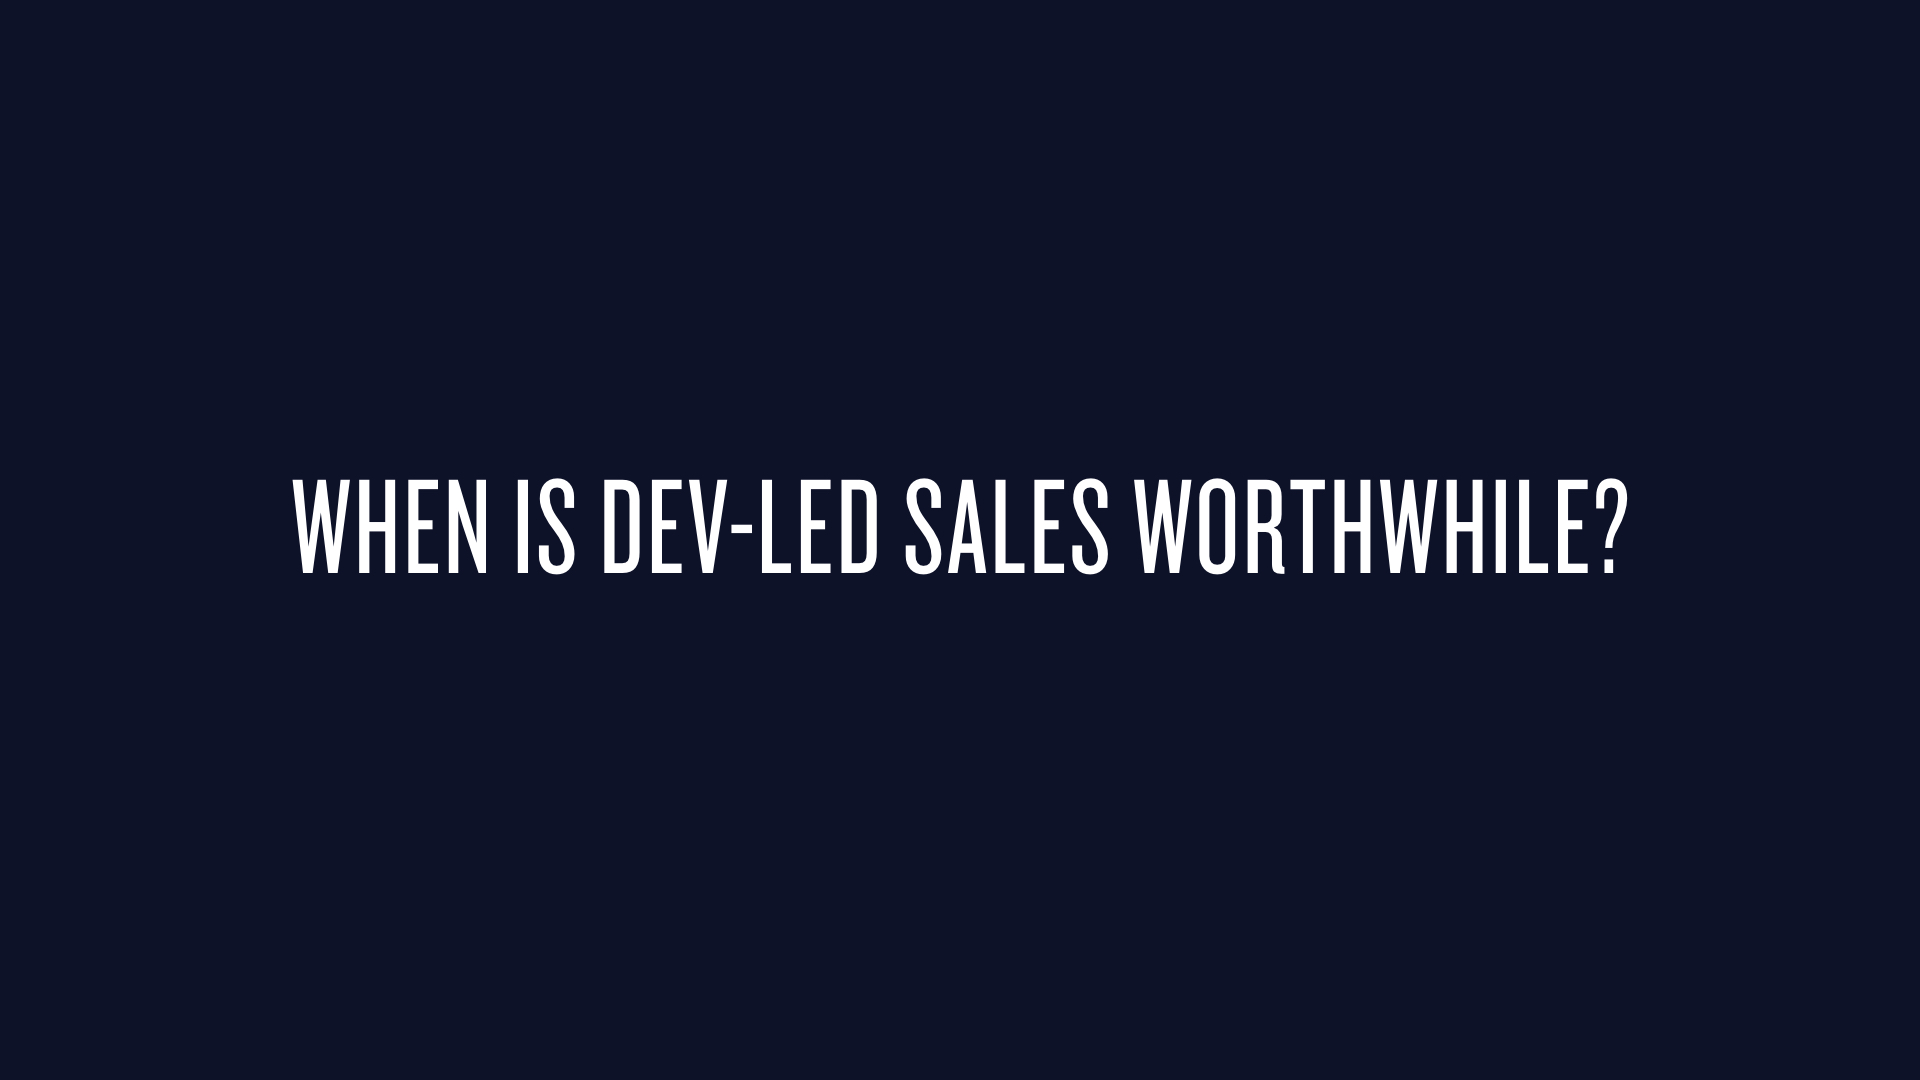 When is dev-led sales worthwhile?